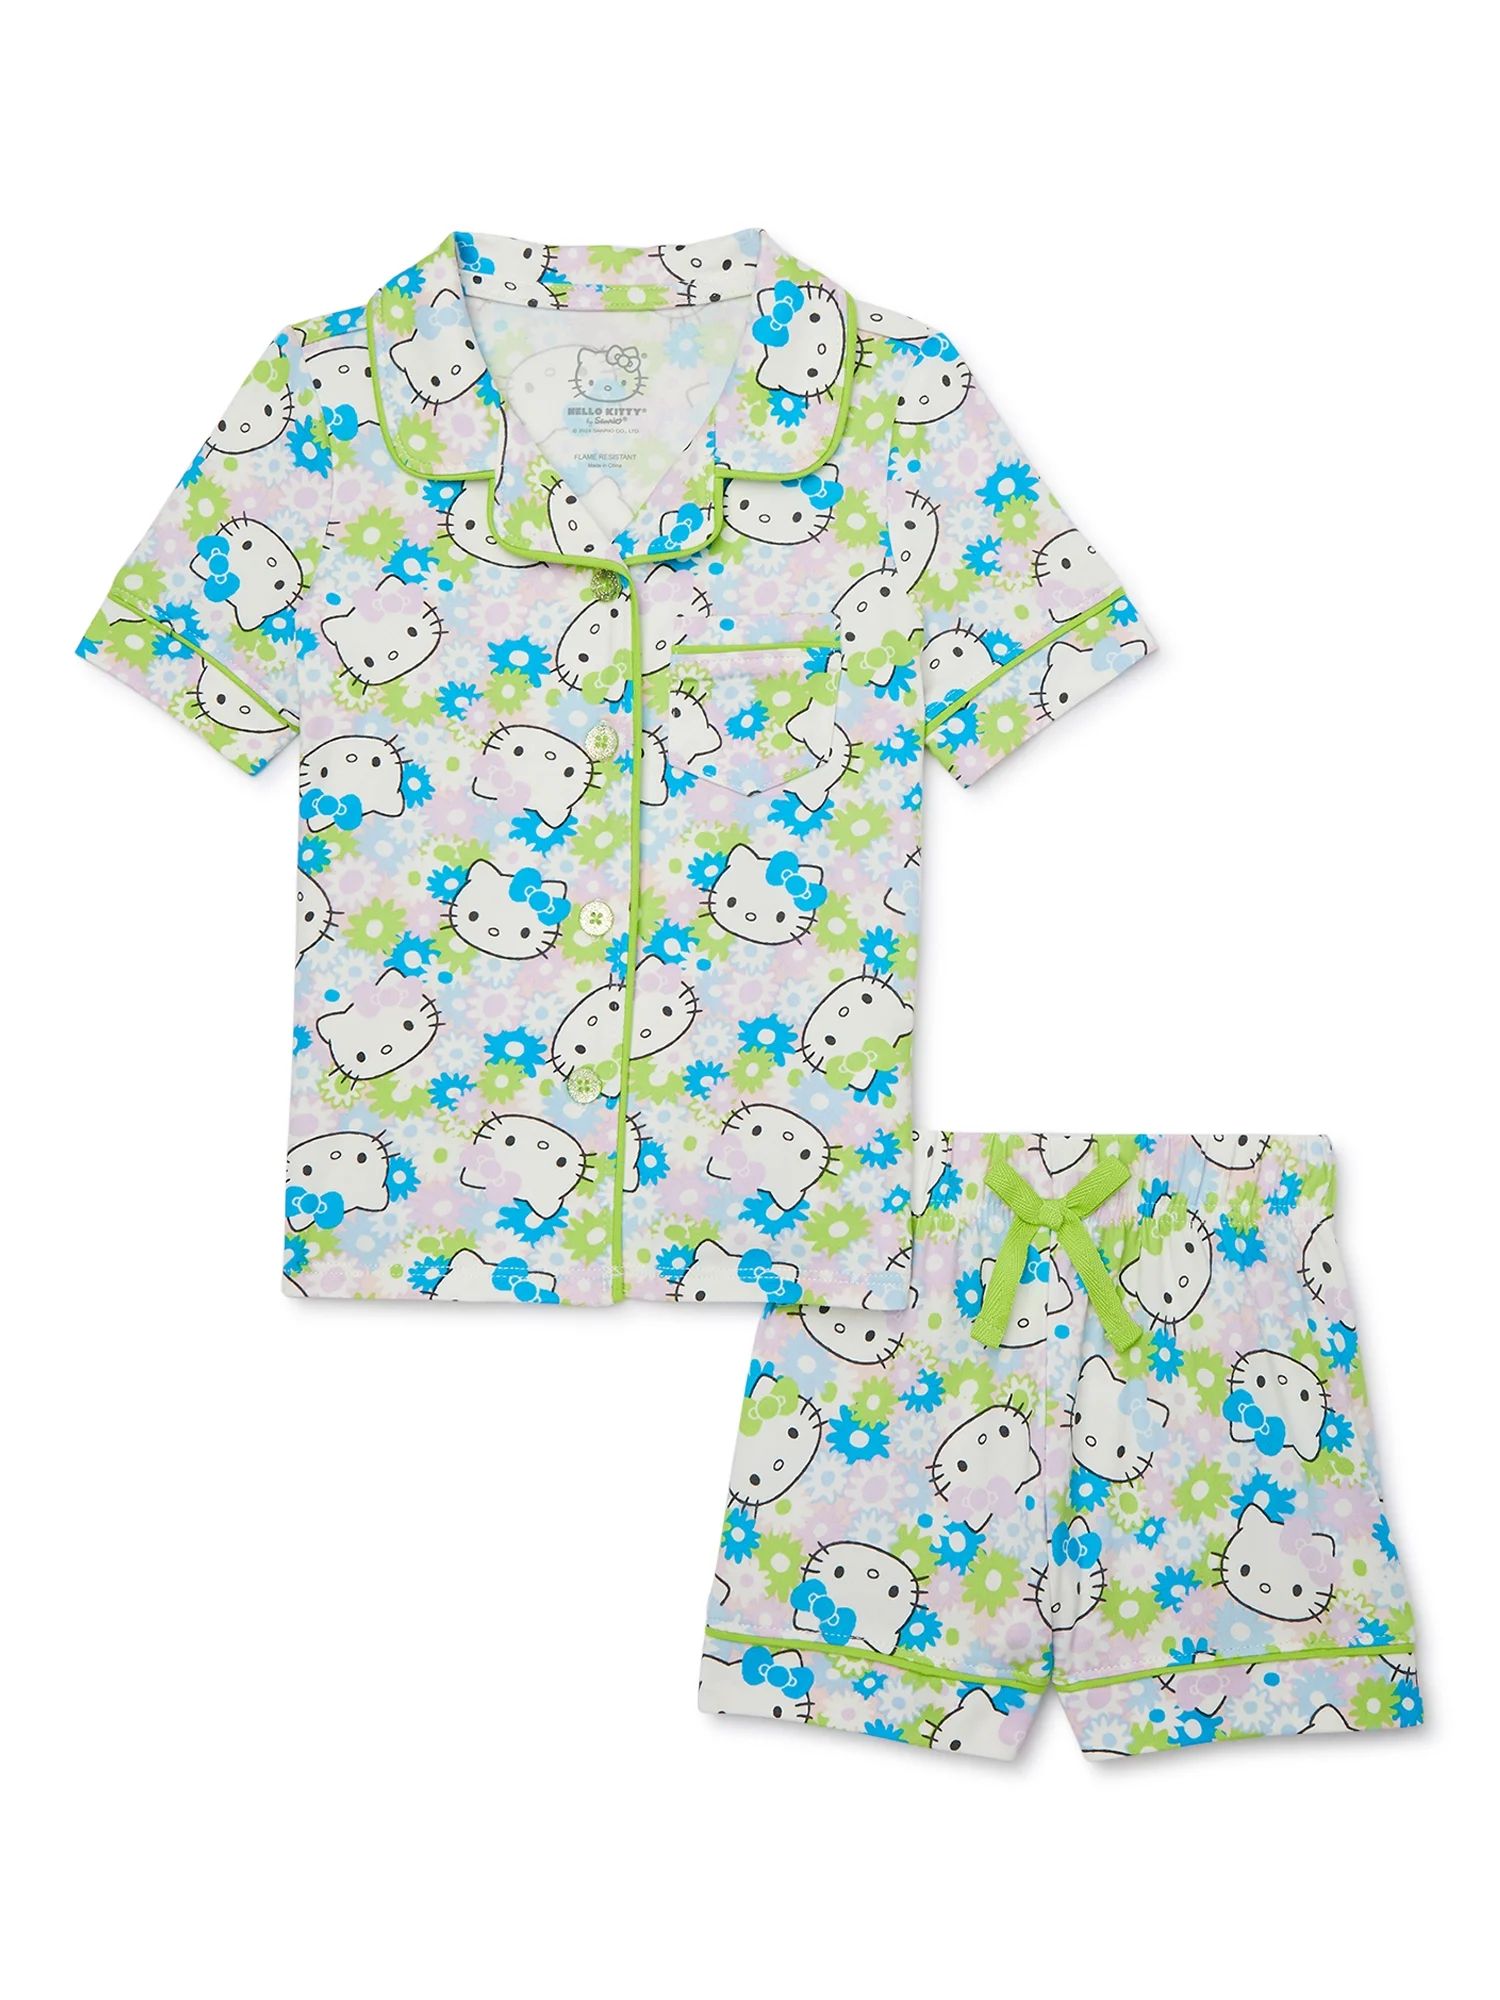 Hello Kitty Toddler Girls Button Front Top and Shorts Pajama Set, 2-Piece, Sizes 2T-5T | Walmart (US)